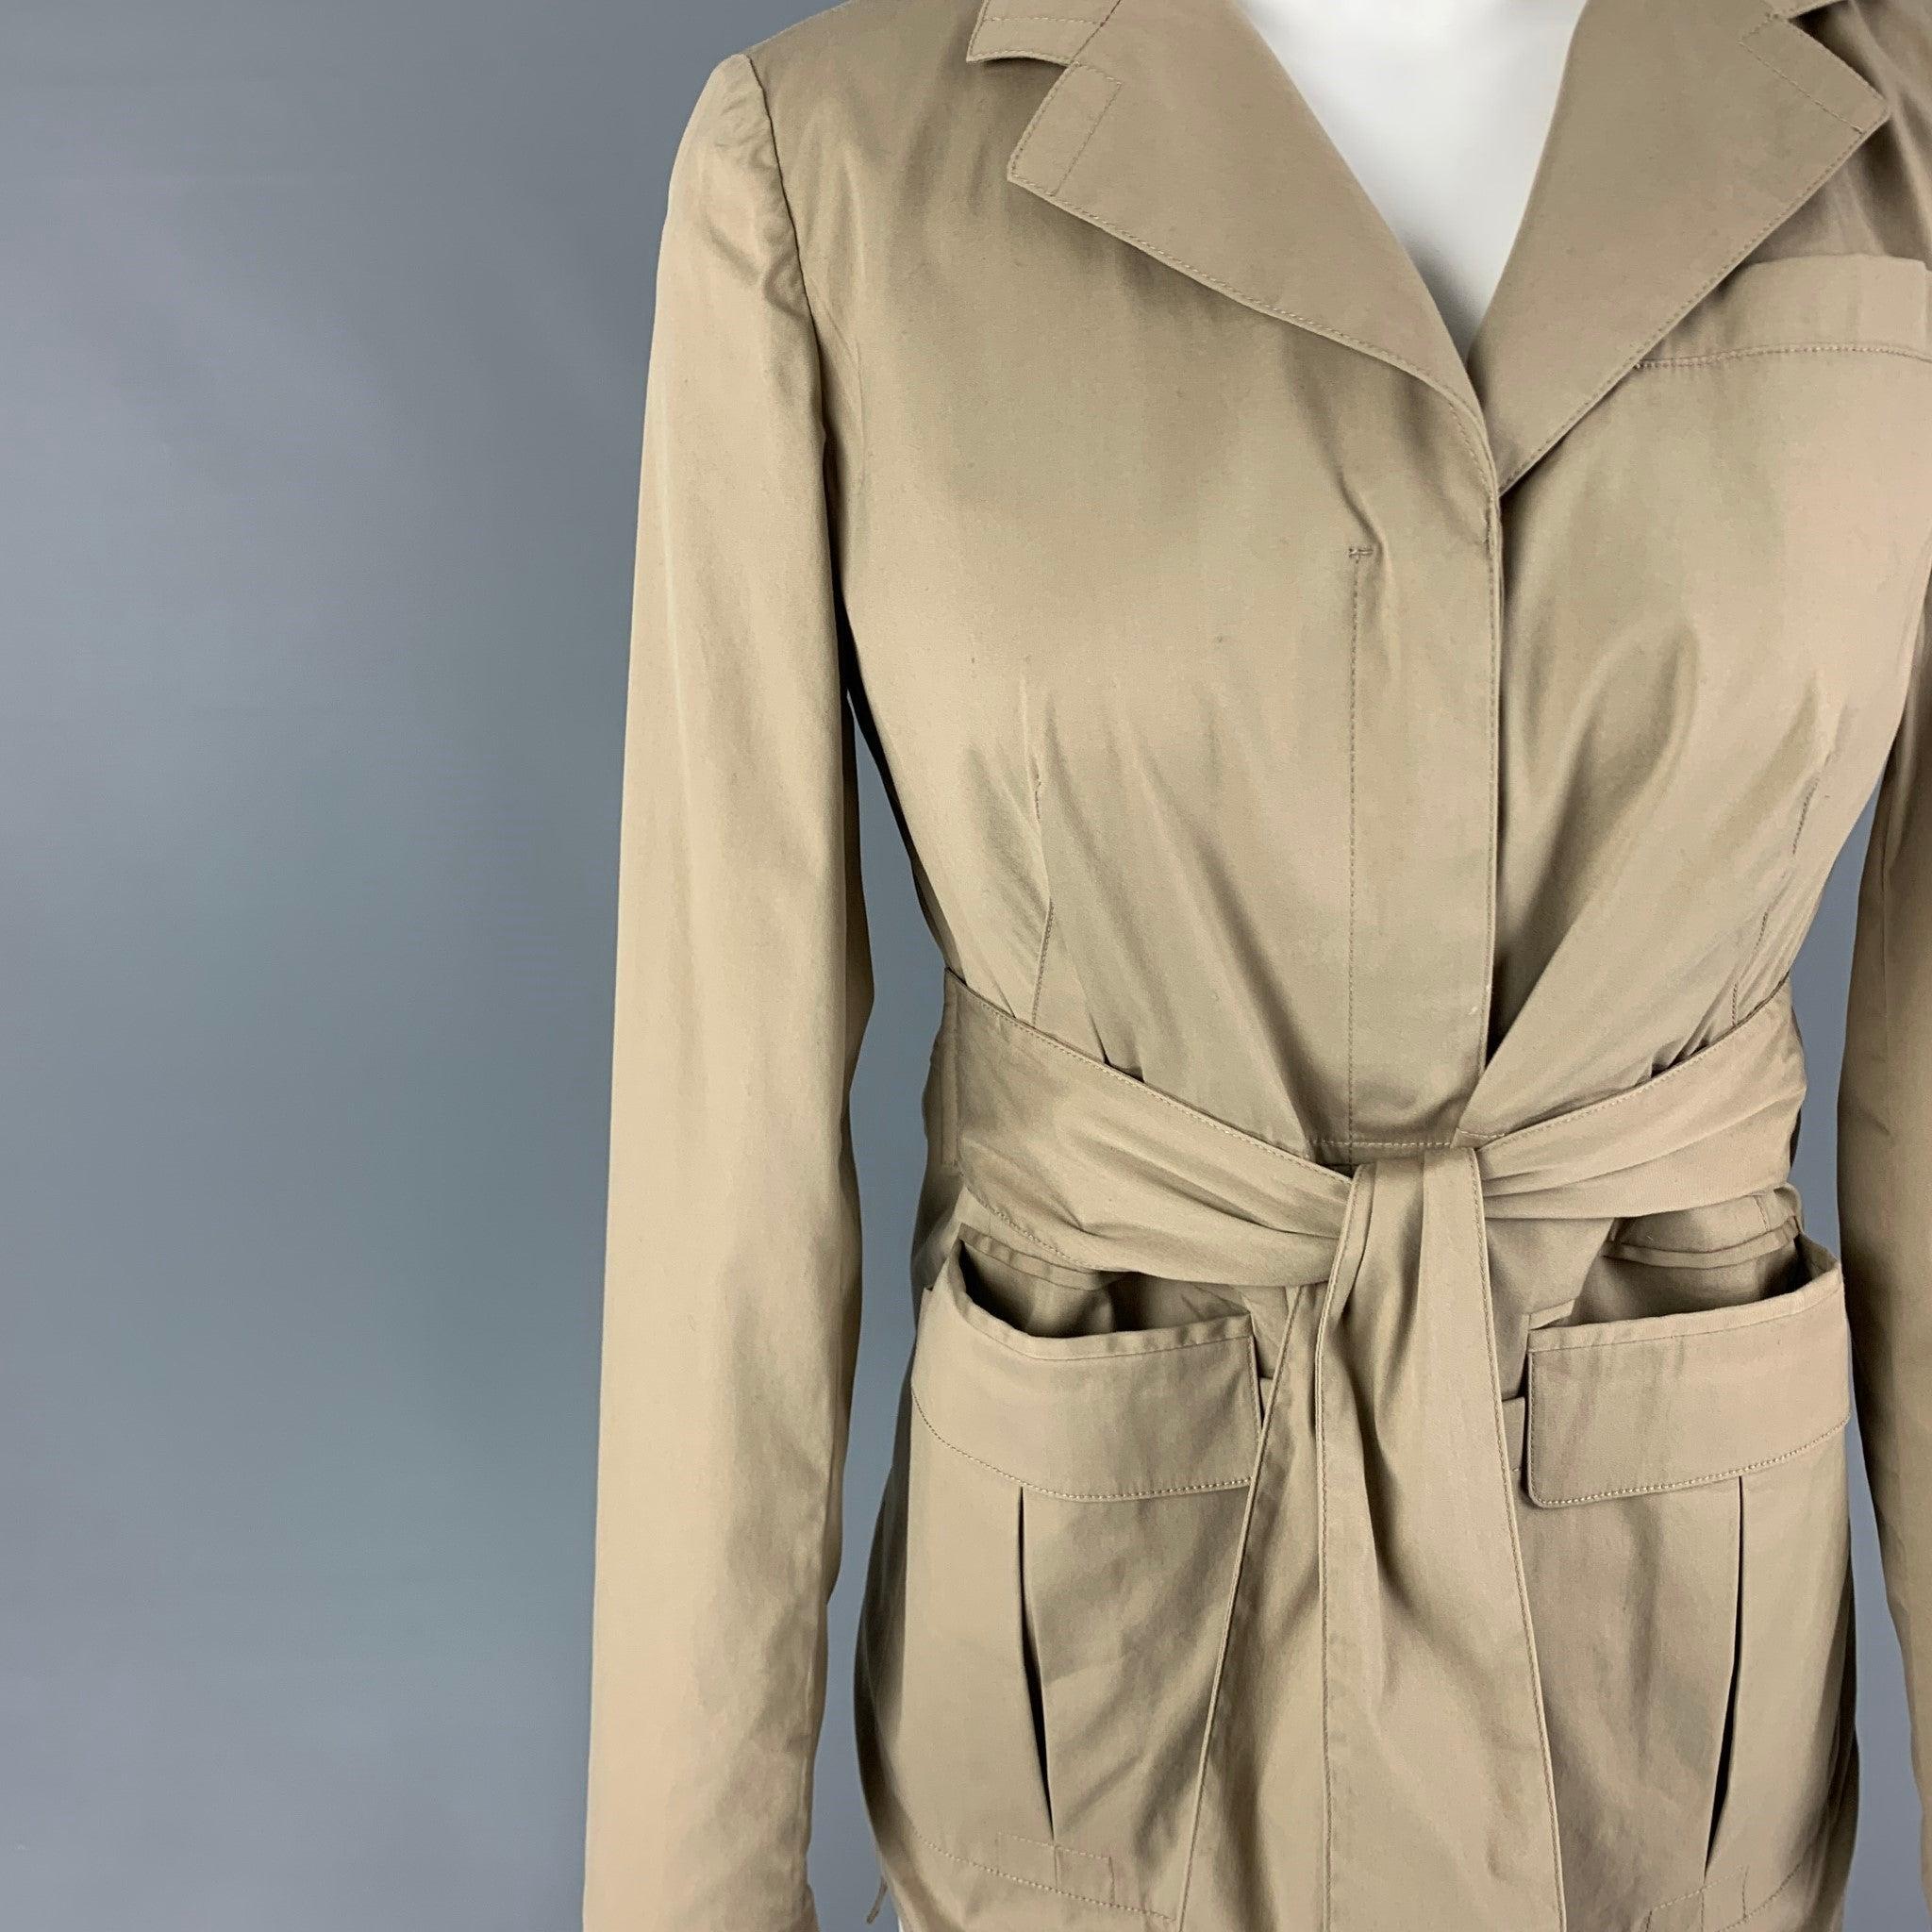 PRADA Size 4 Beige Cotton Blend Ruched Back Belted Jacket In Good Condition For Sale In San Francisco, CA